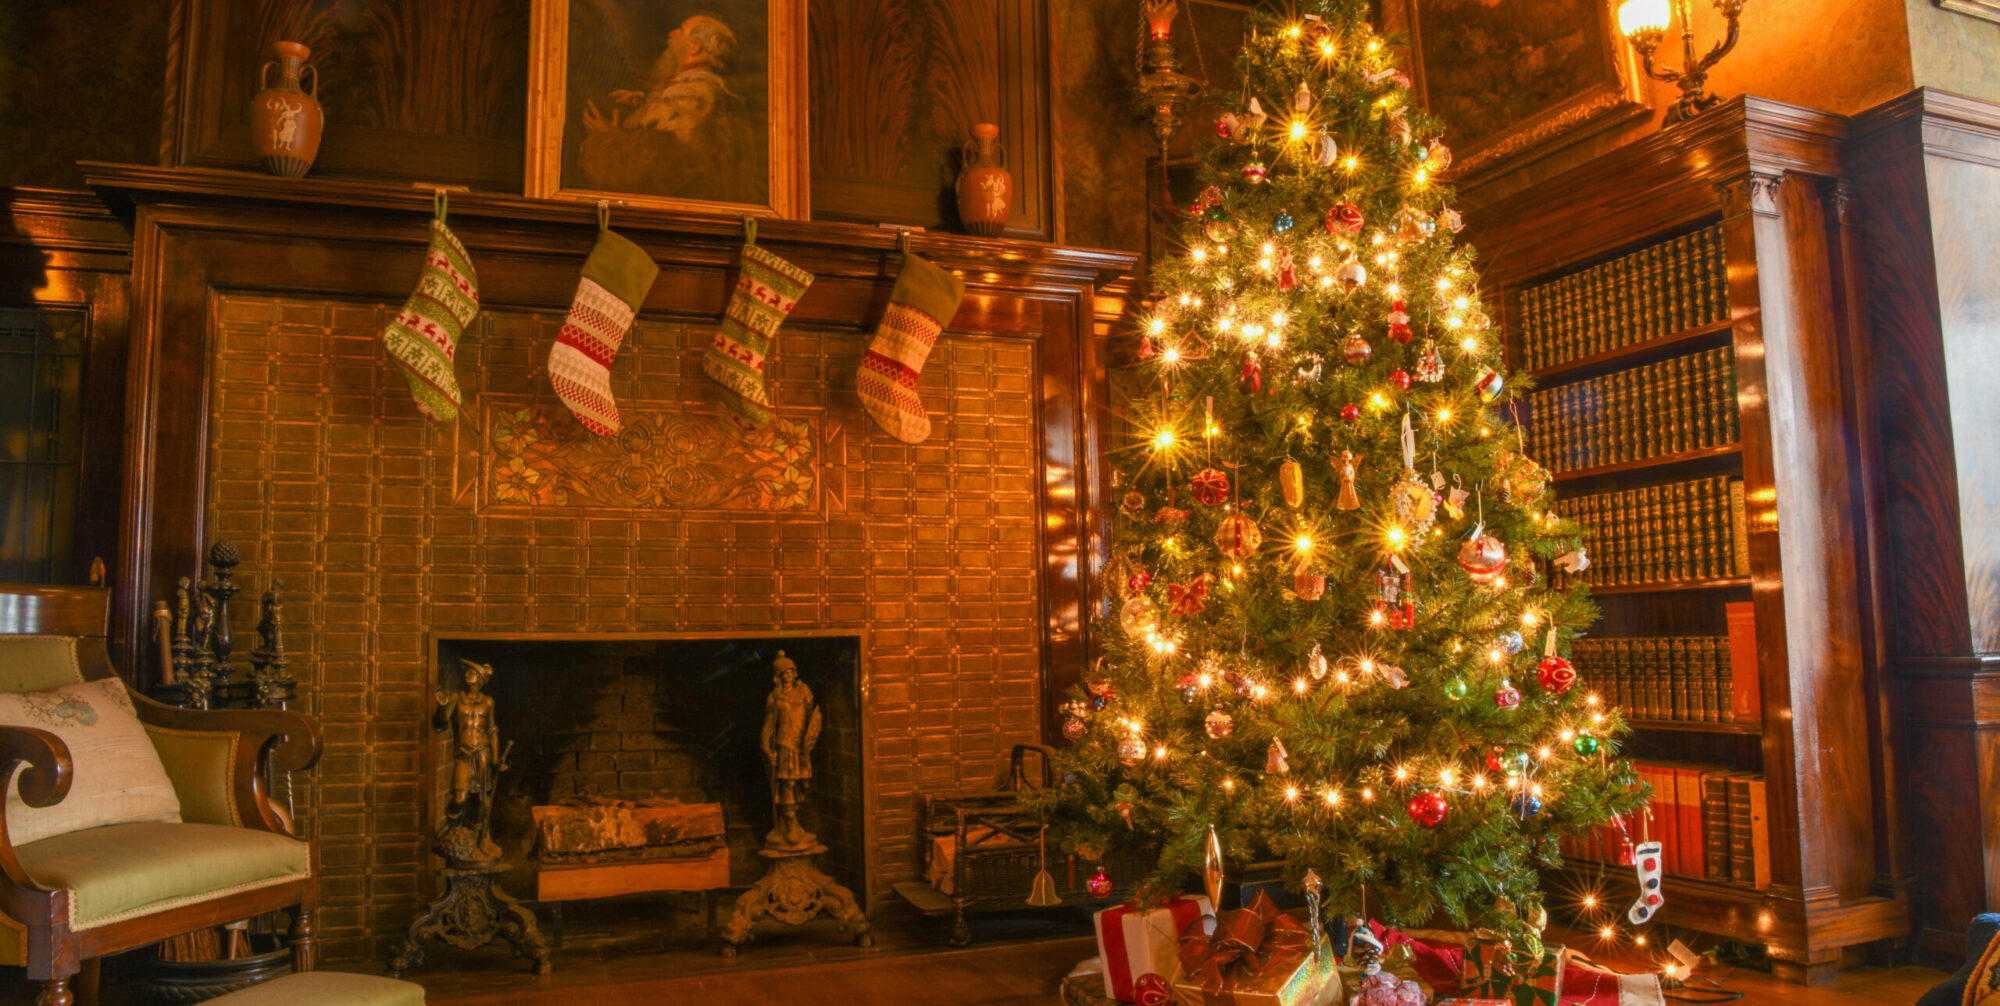 A Christmas tree stands next to a fireplace with stockings hung over it and a framed photo on top of it. There is a green sitting chair on the left of the photo.